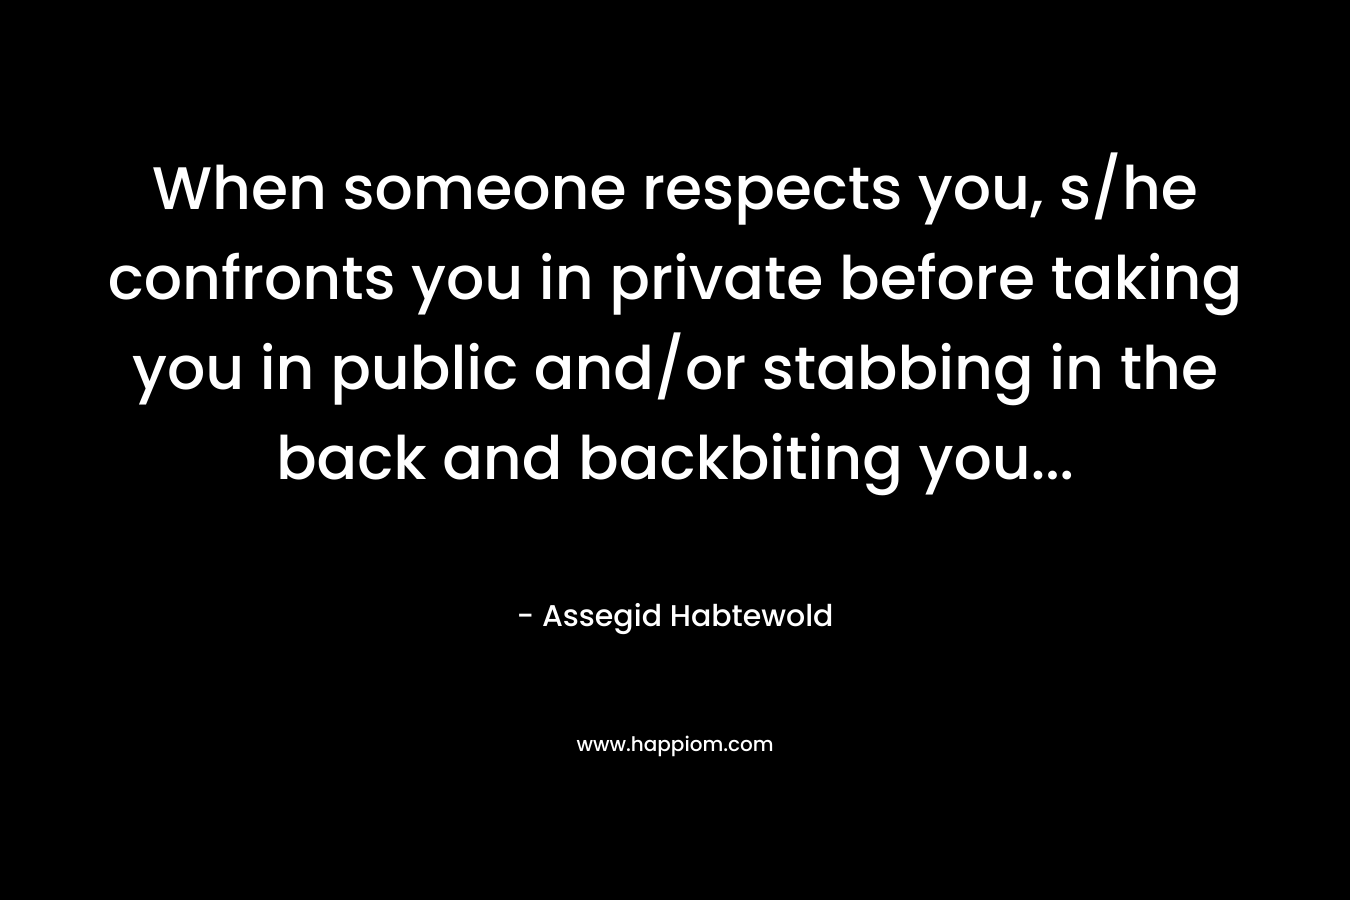 When someone respects you, s/he confronts you in private before taking you in public and/or stabbing in the back and backbiting you… – Assegid Habtewold